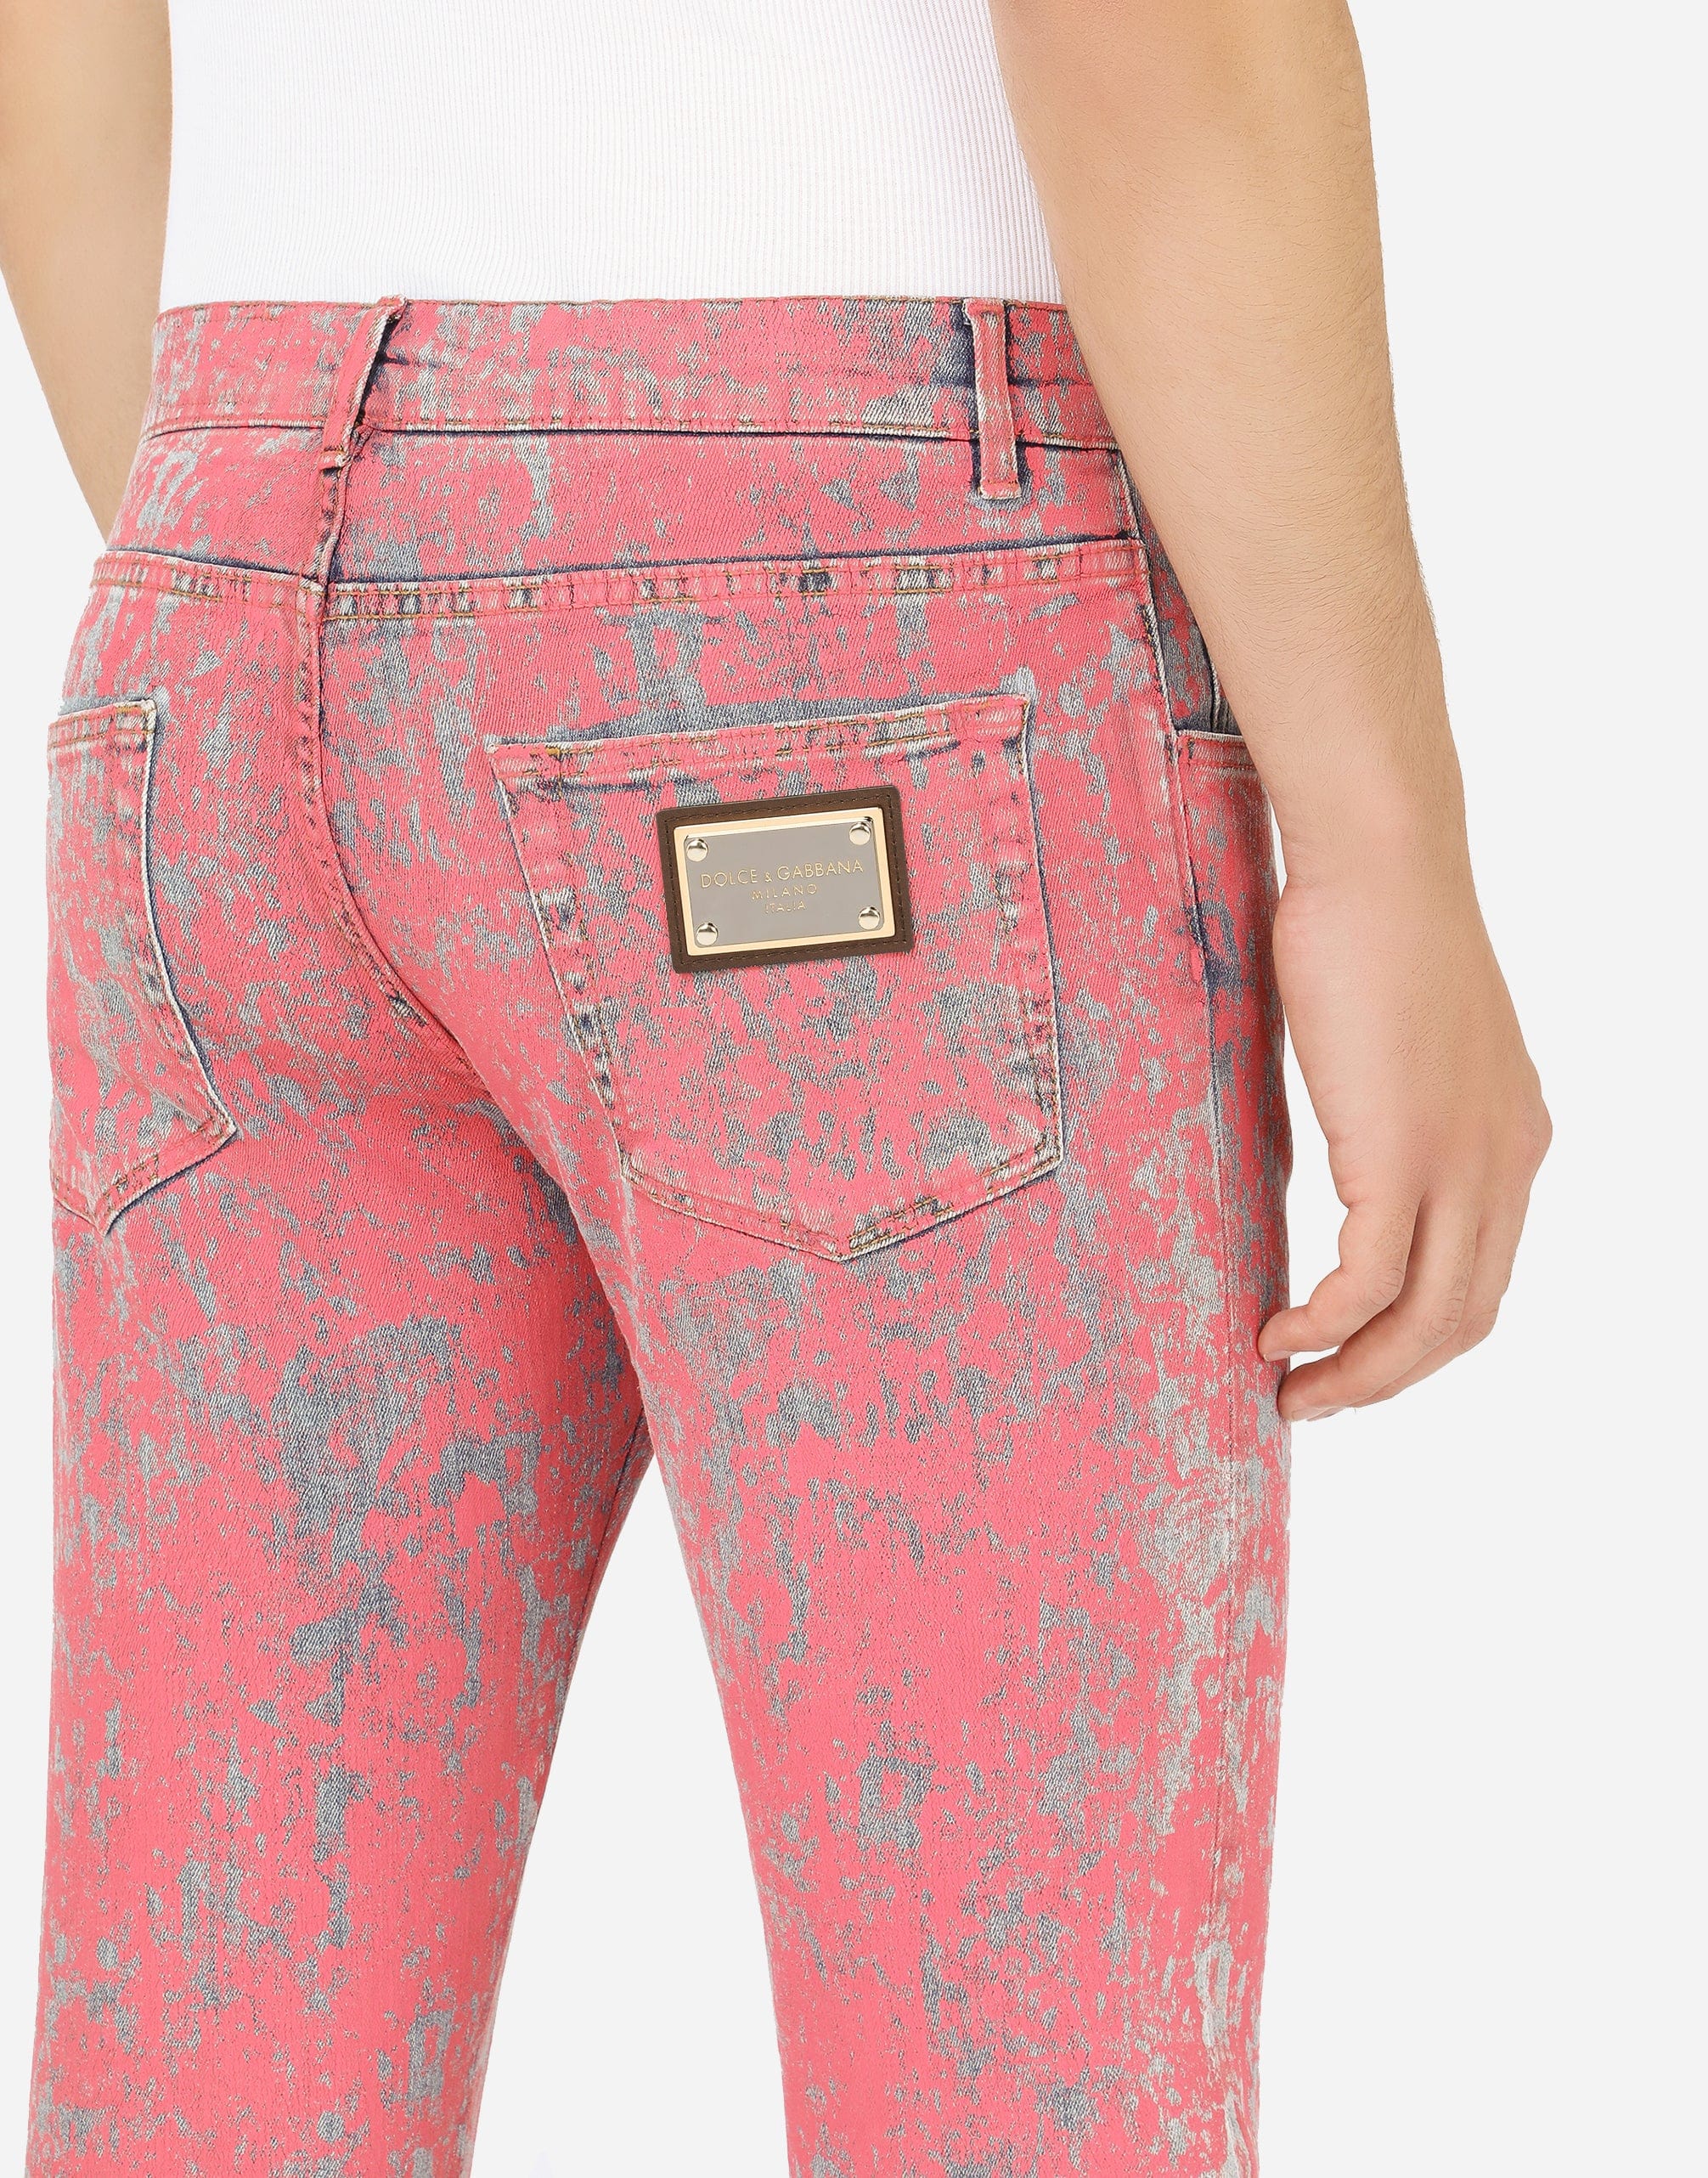 Slim-Fit Stretch Jeans With Marbled Print